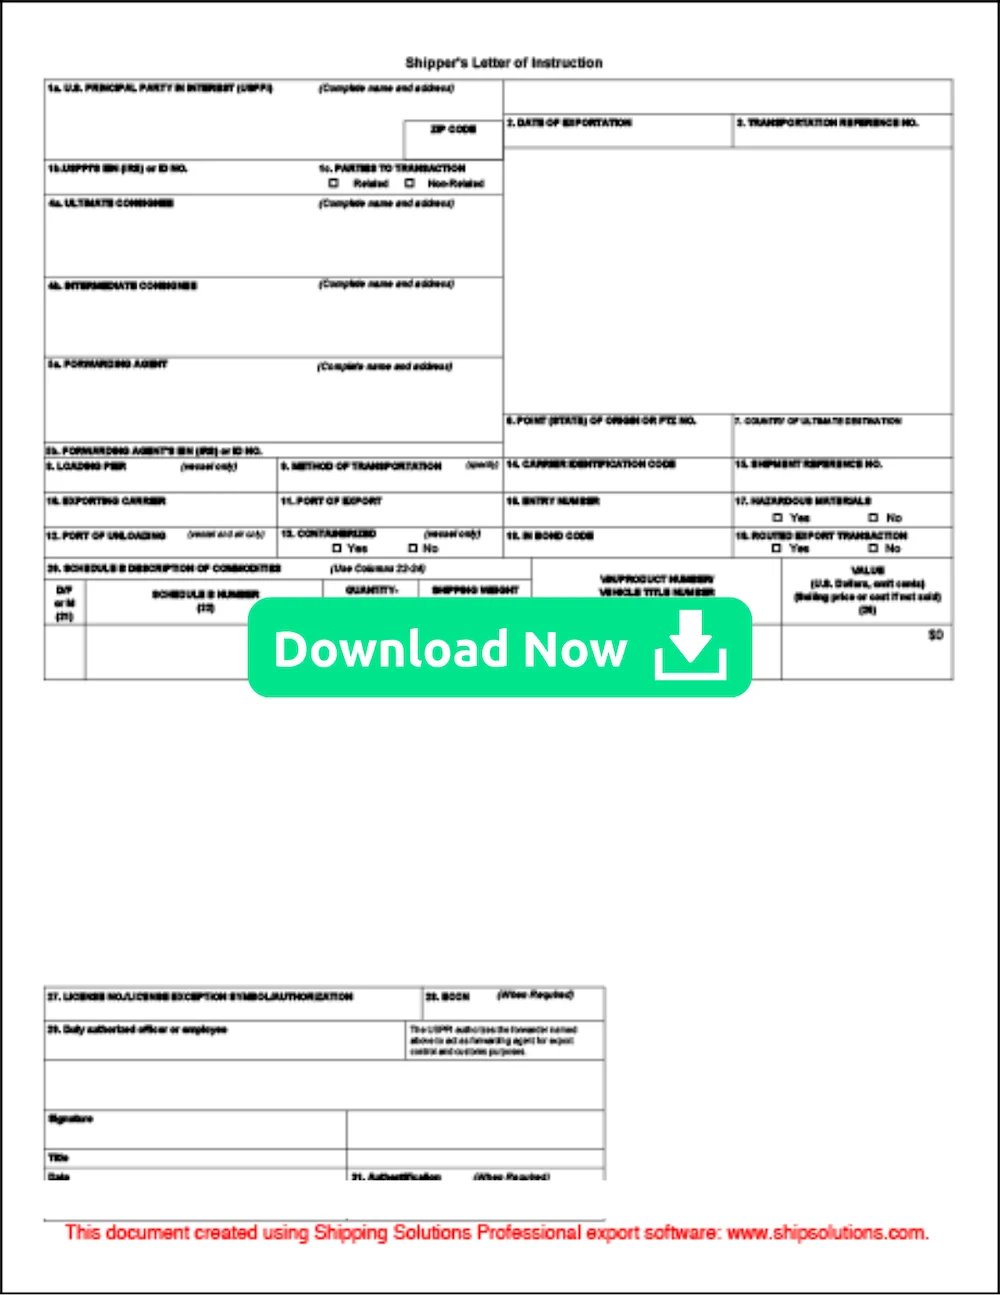 Shipper's Letter of Instruction in SED | Download Now